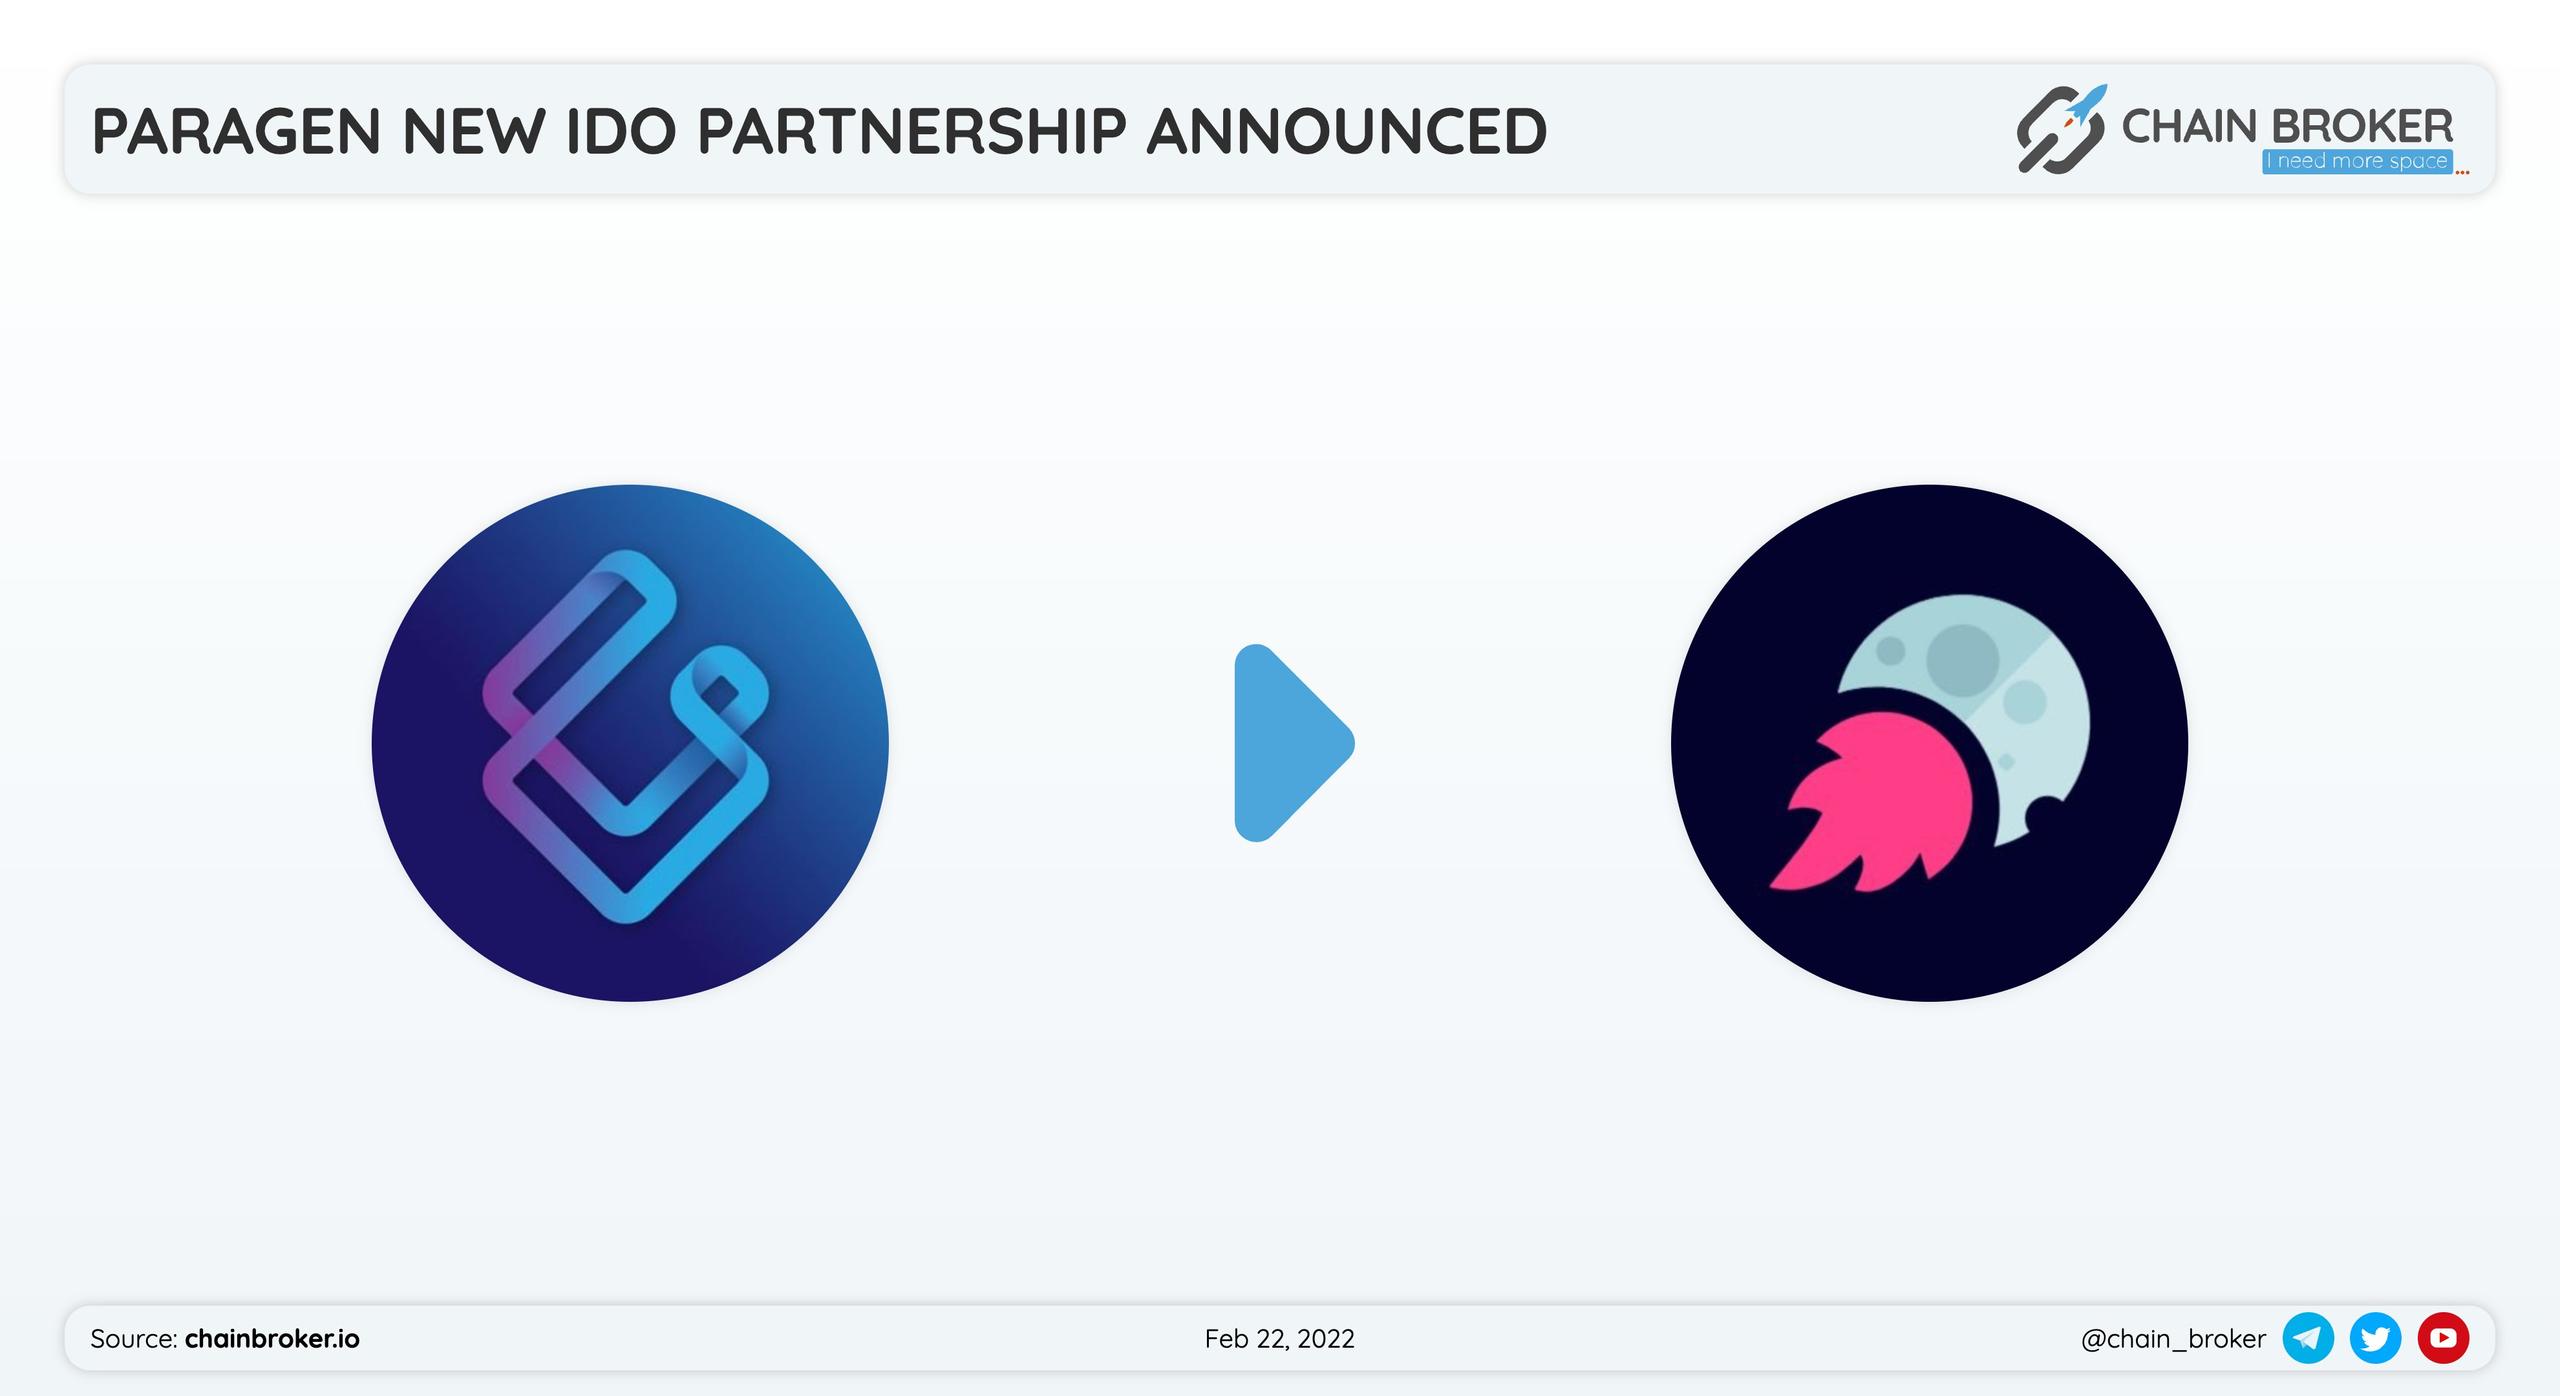 Paragen has partnered with Moonstarter for a token launch.